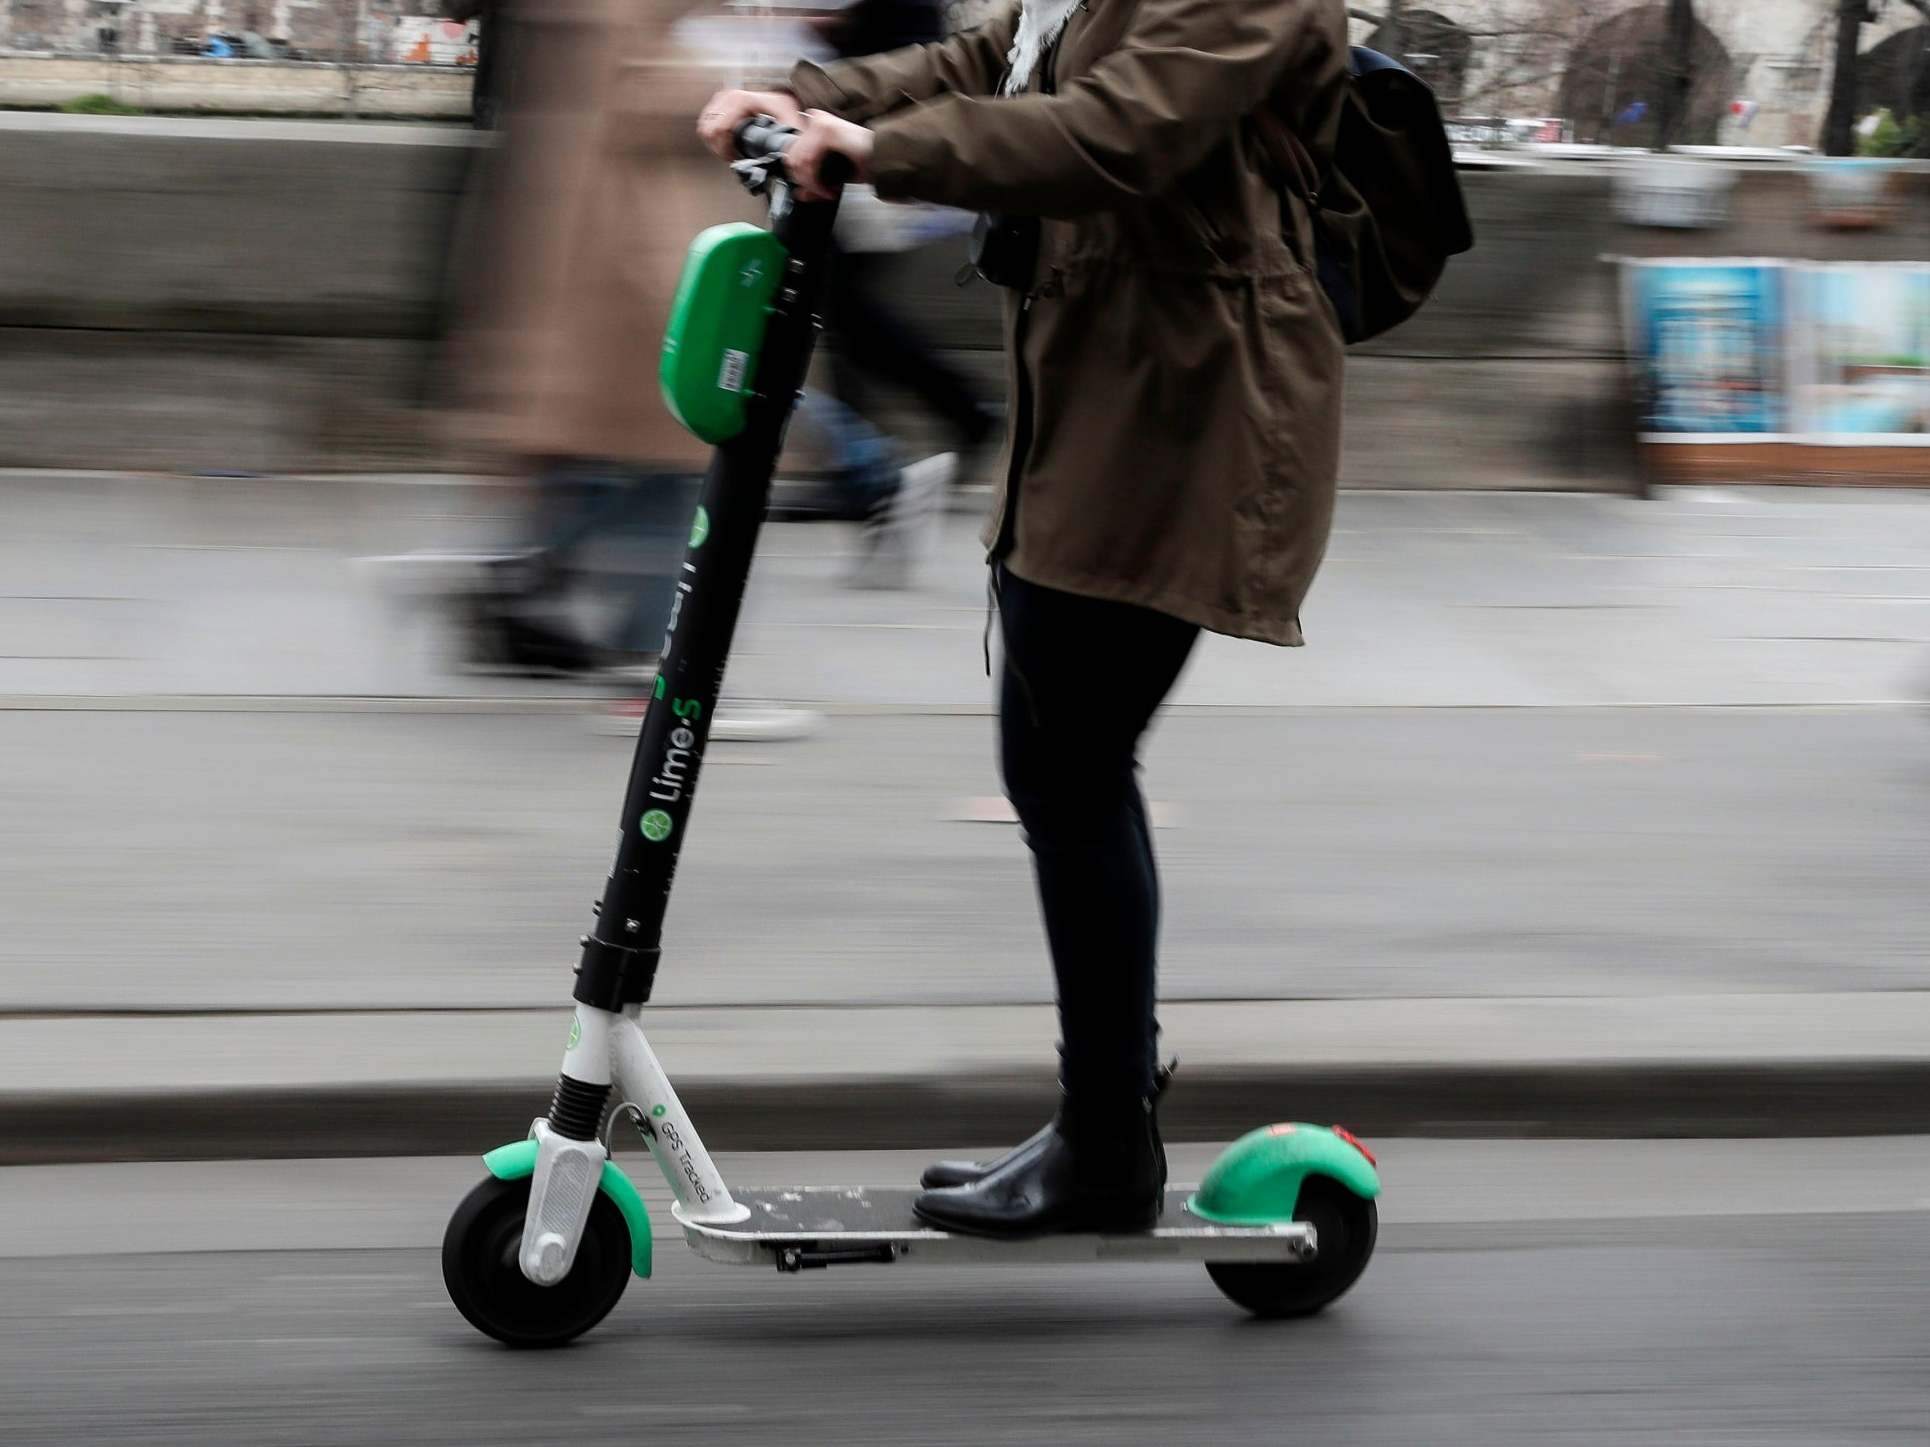 Rental electric scooters to be legal on roads for 15mph trials